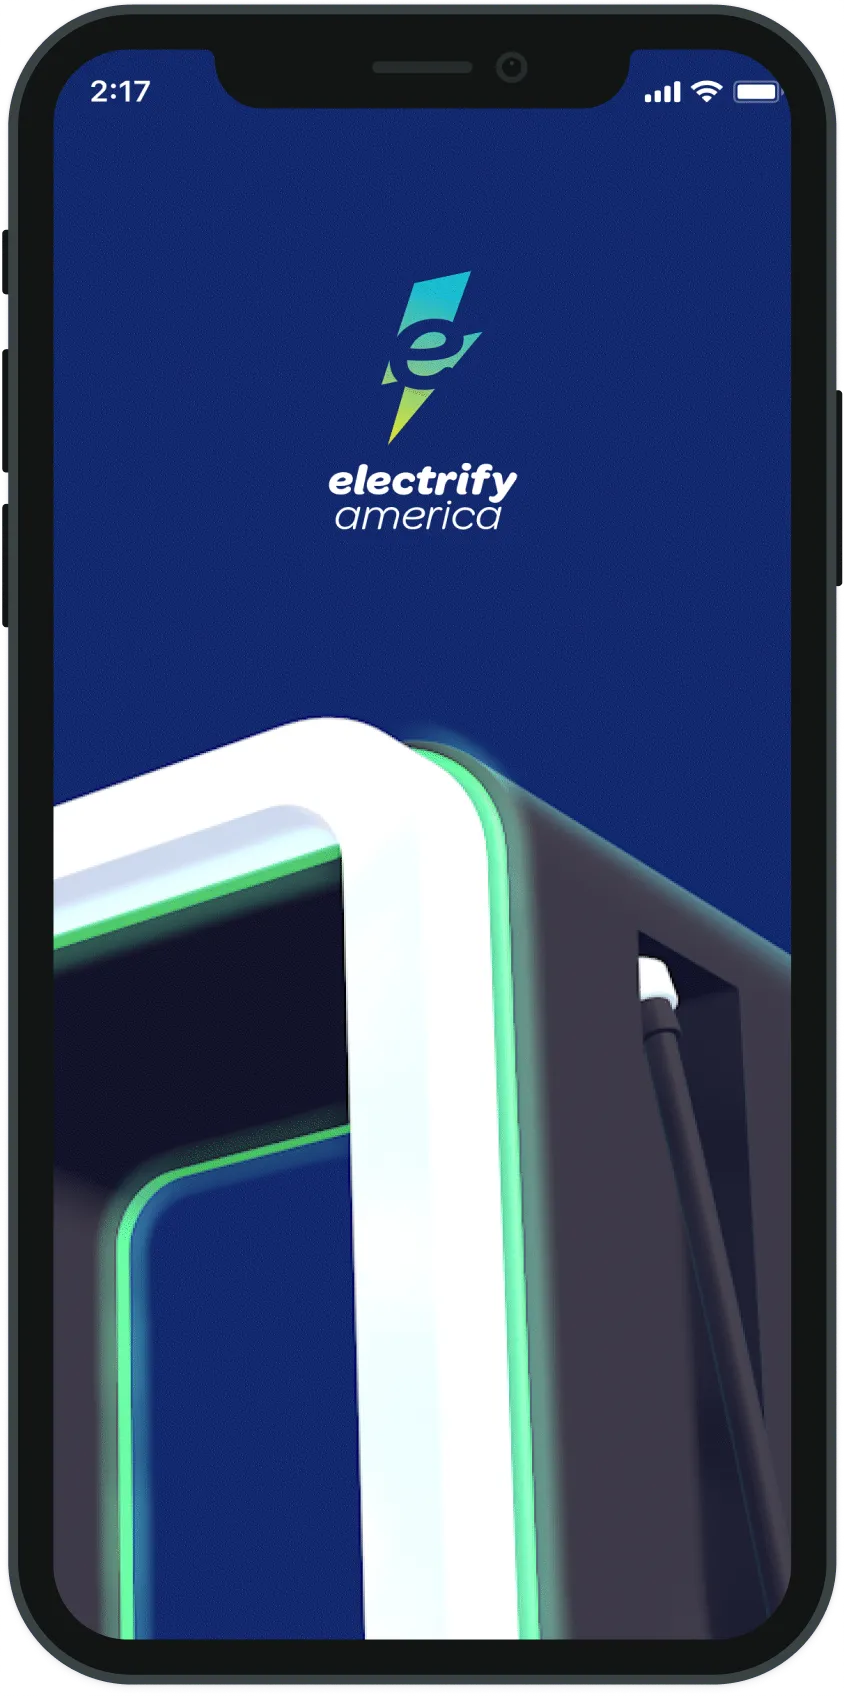 This image displays the enrollment process for a Premium Offer in the Electrify American app on an iPhone.